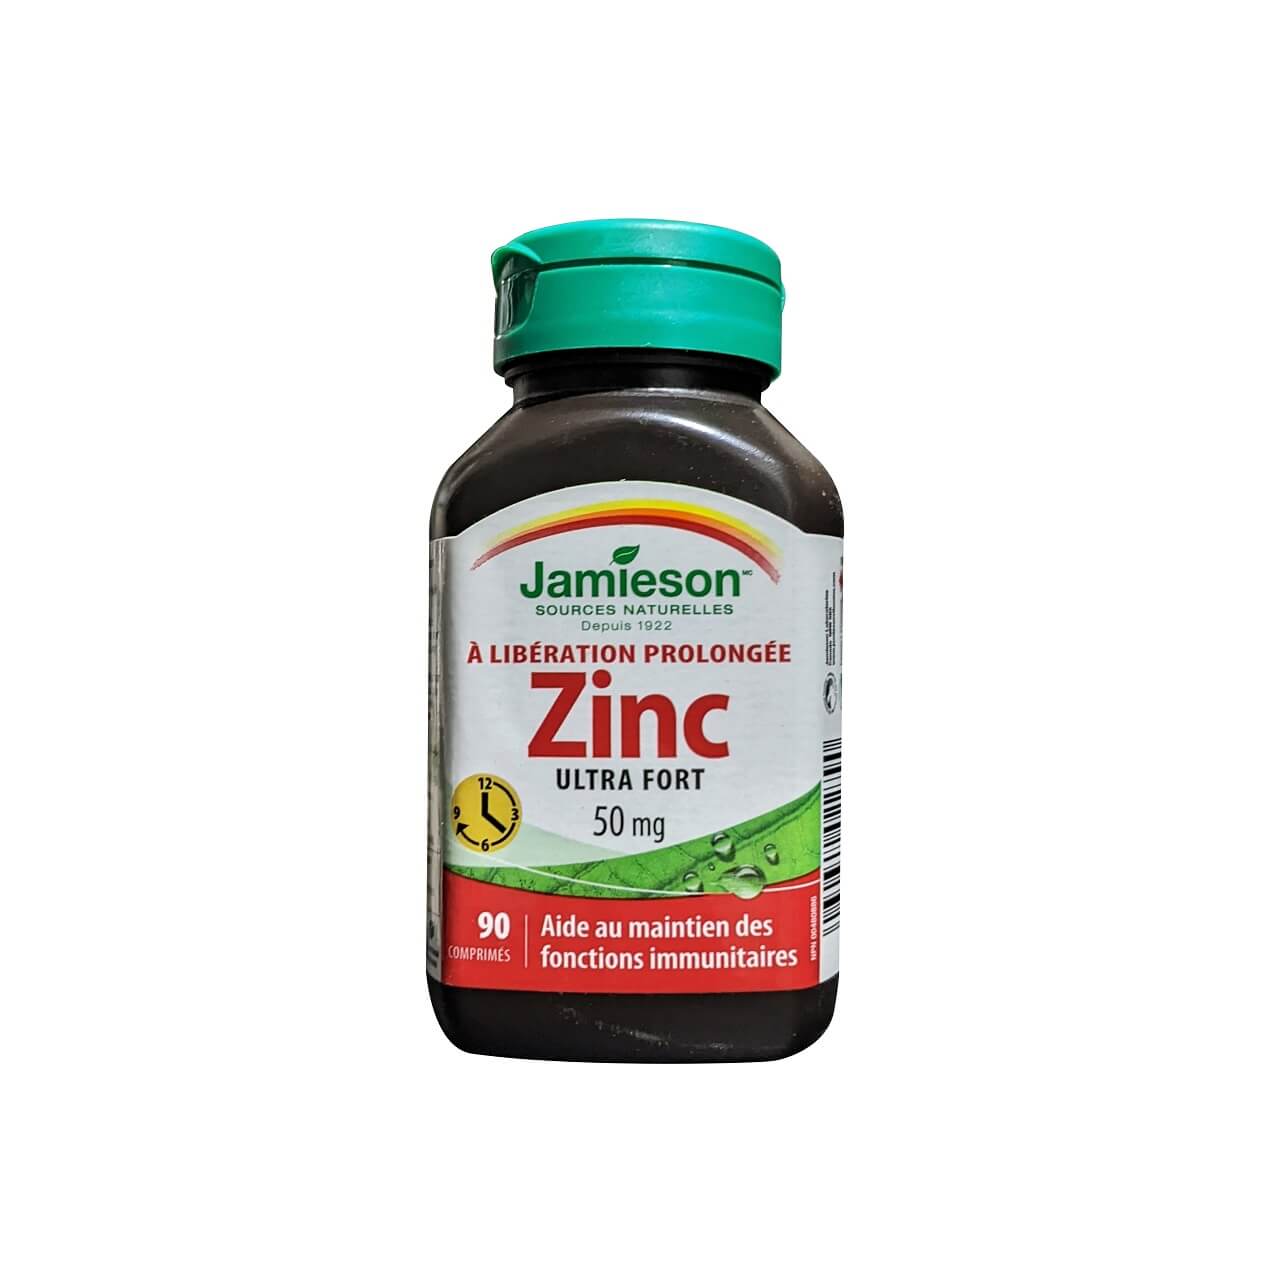 Product label for Jamieson Zinc 50 mg Ultra Strength Timed Release (90 tablets) in French